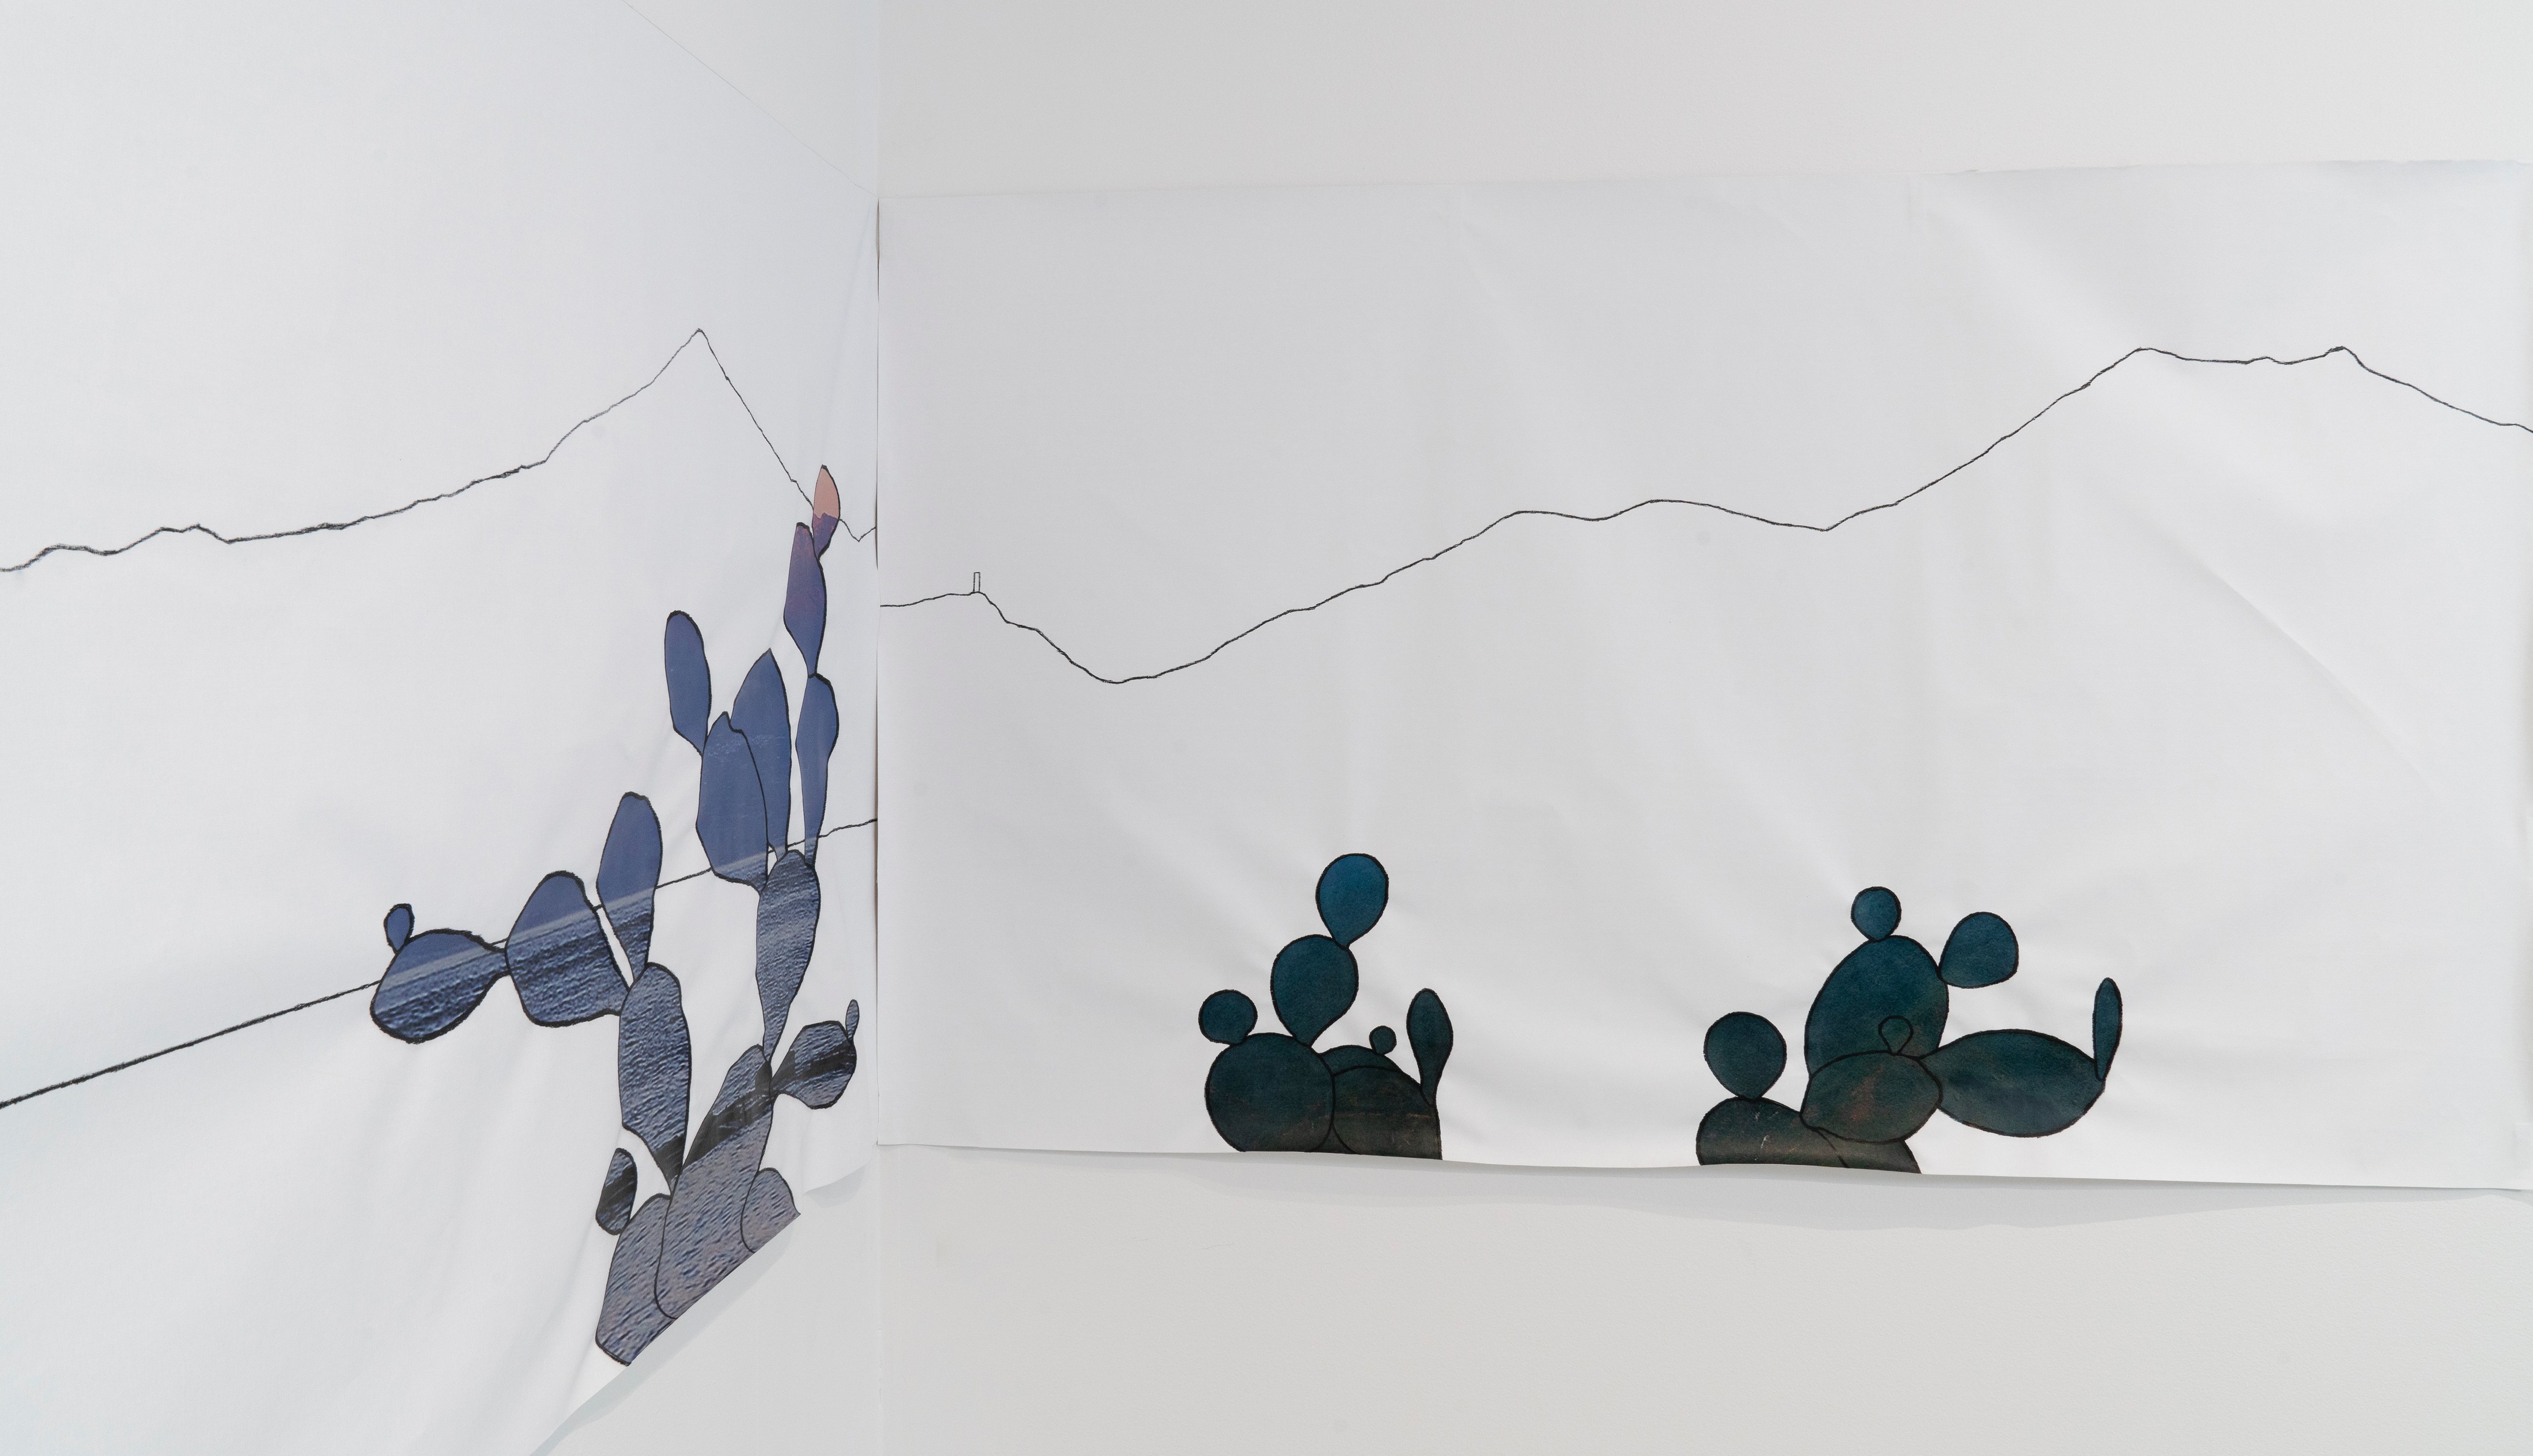 Hayfer Brea, (from left to right), Existencial Territories (Teide Peak) (Detail), and Existencial Territories (Ávila Hill), 2019, Mixed media on fabric, 49 x 80 each